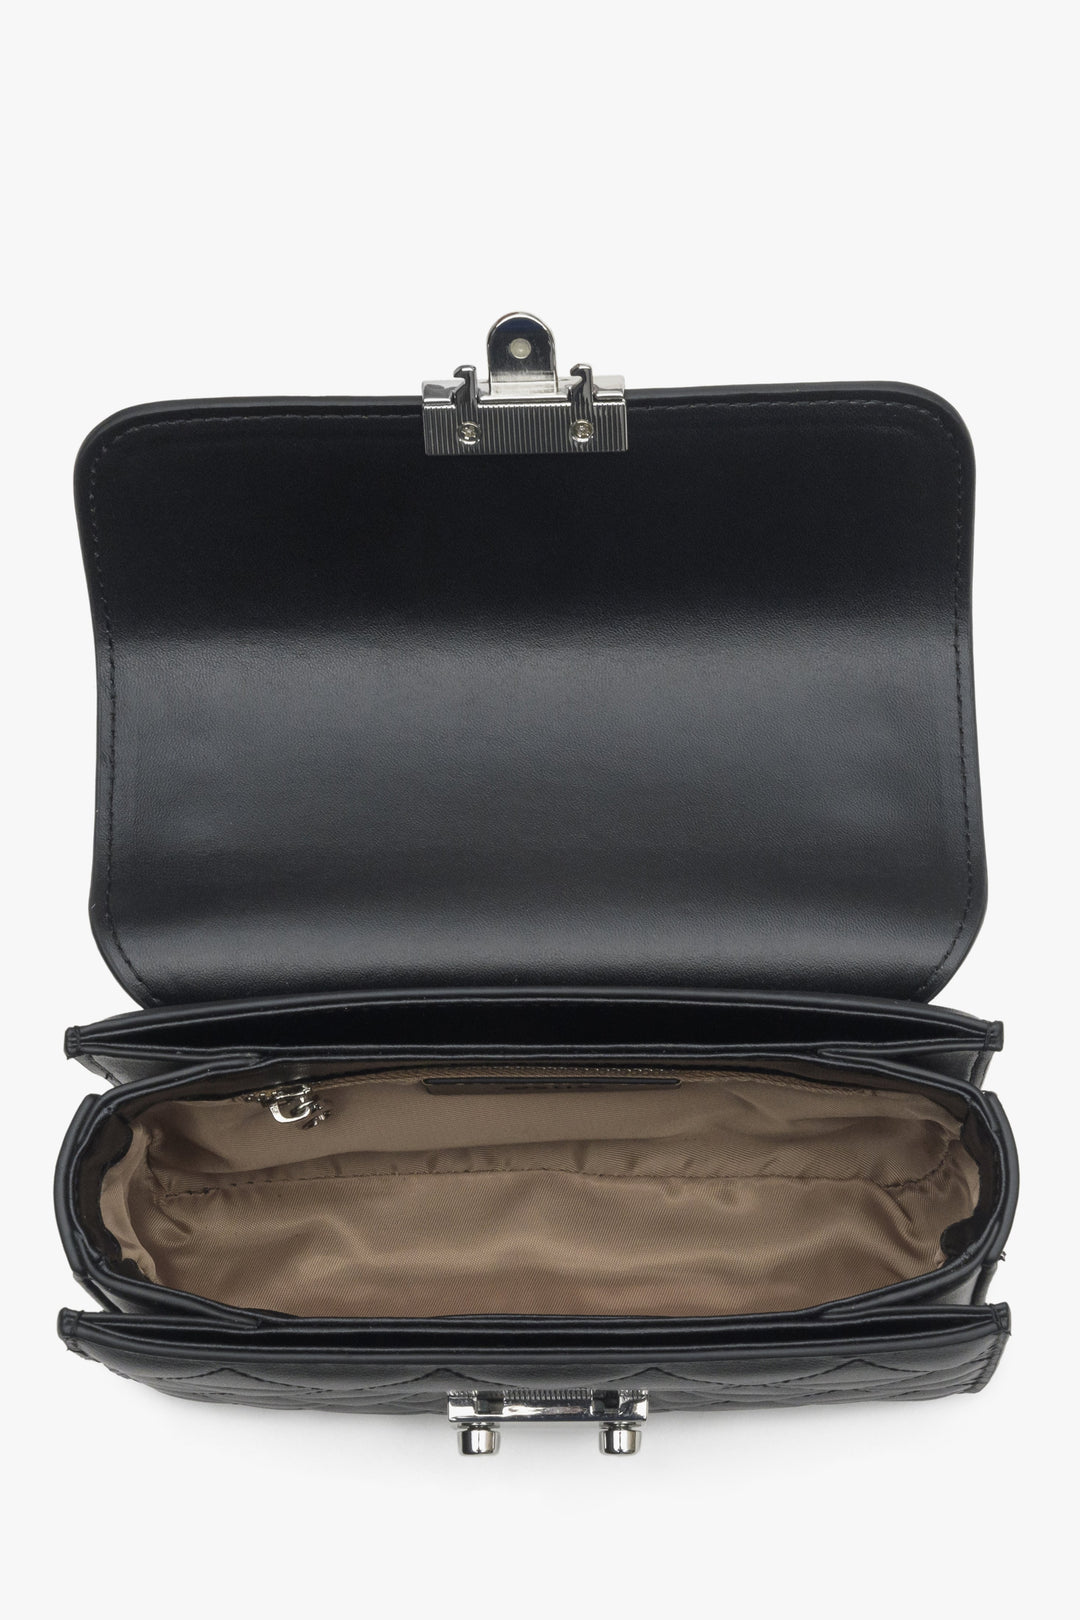 Women's black shoulder bag made of genuine leather with silver accents - close-up of the interior of the model.